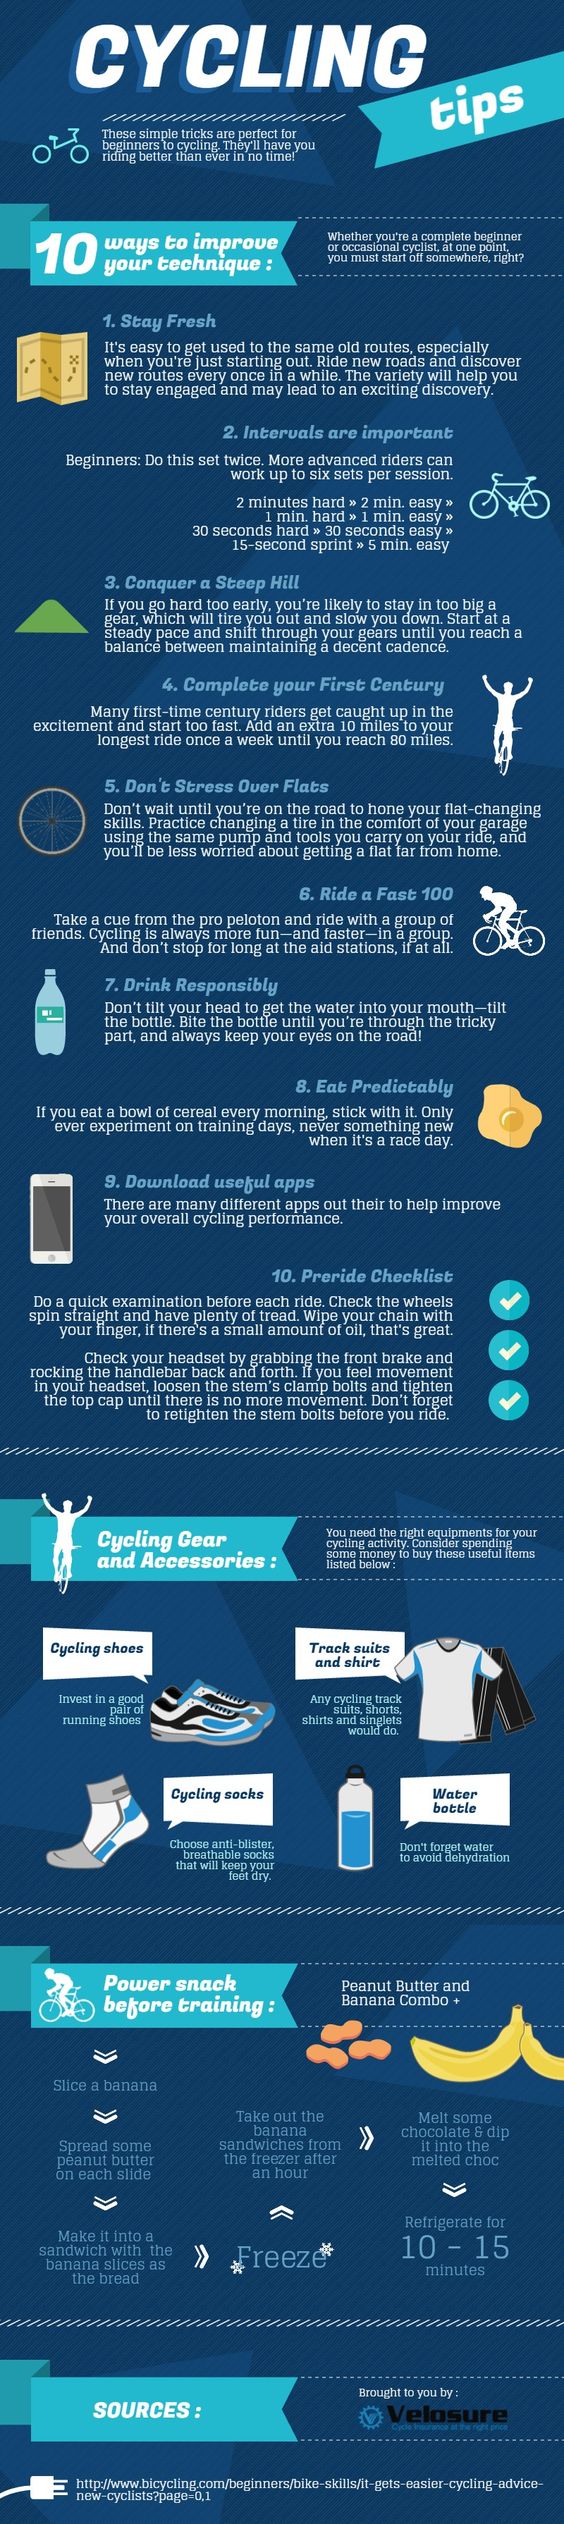 Cycling Tips #infographic #Cycling #Tips #Bikes